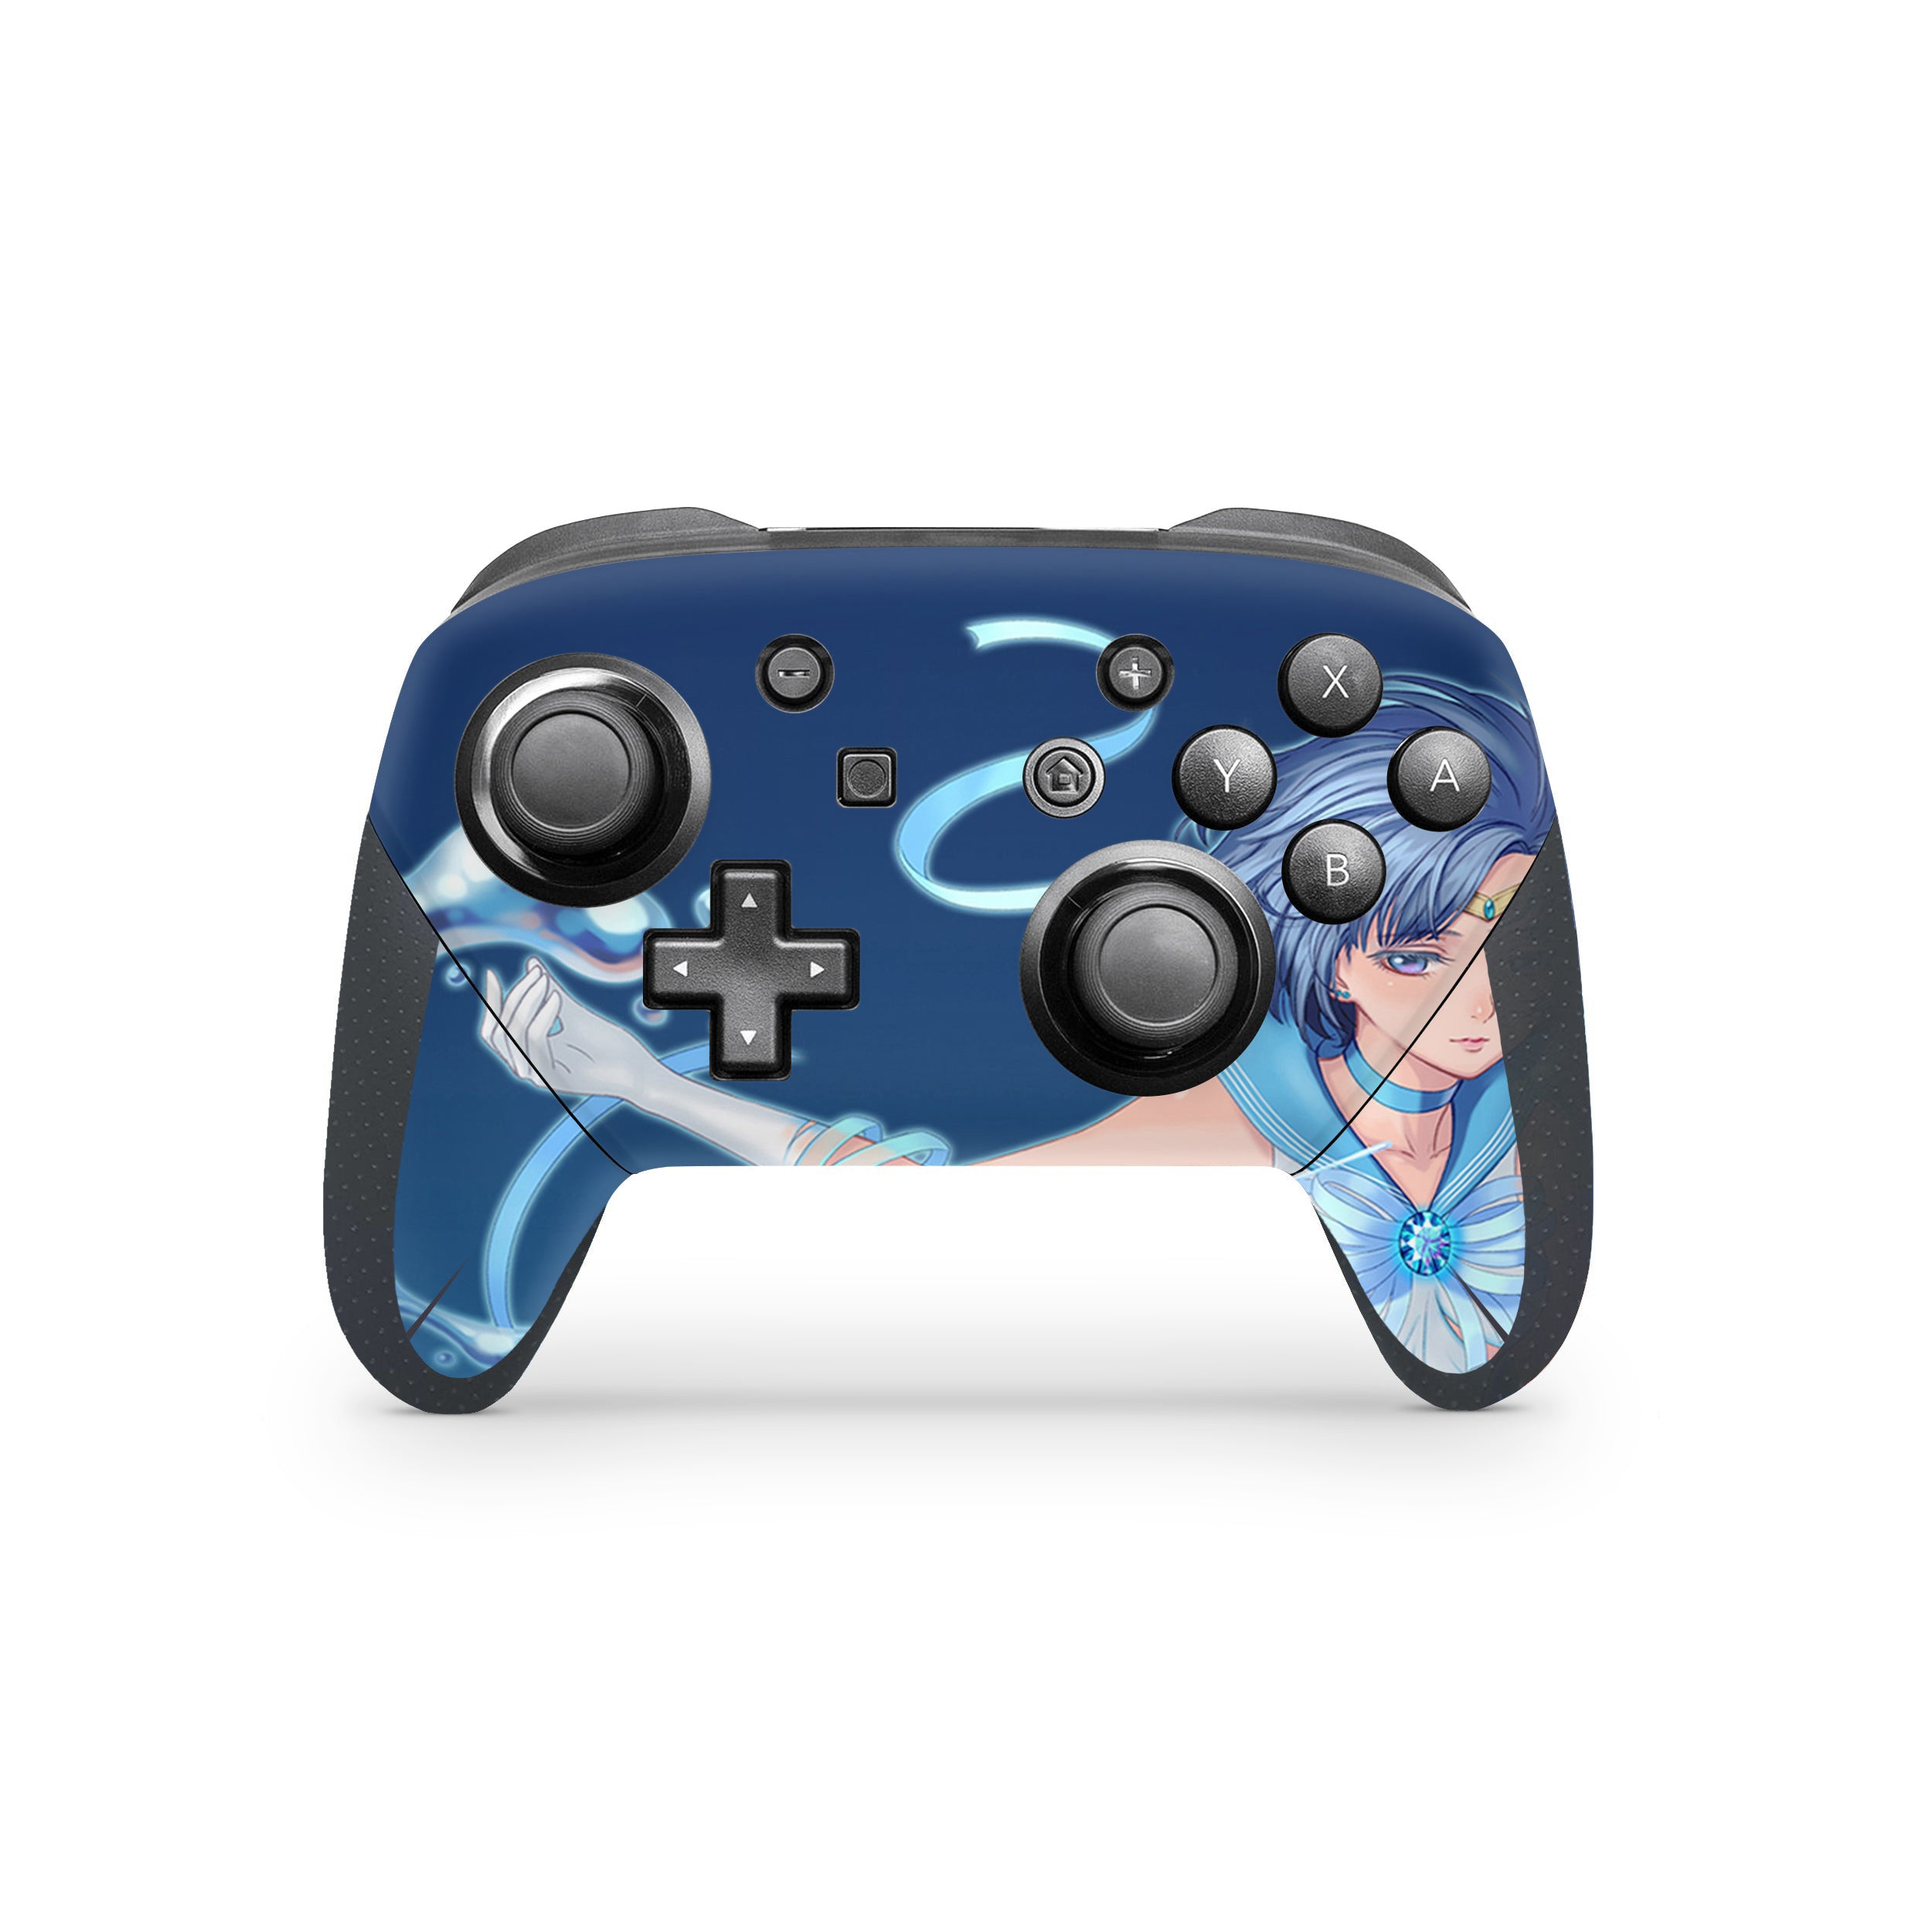 A video game skin featuring a Sailor Moon Mercury design for the Switch Pro Controller.